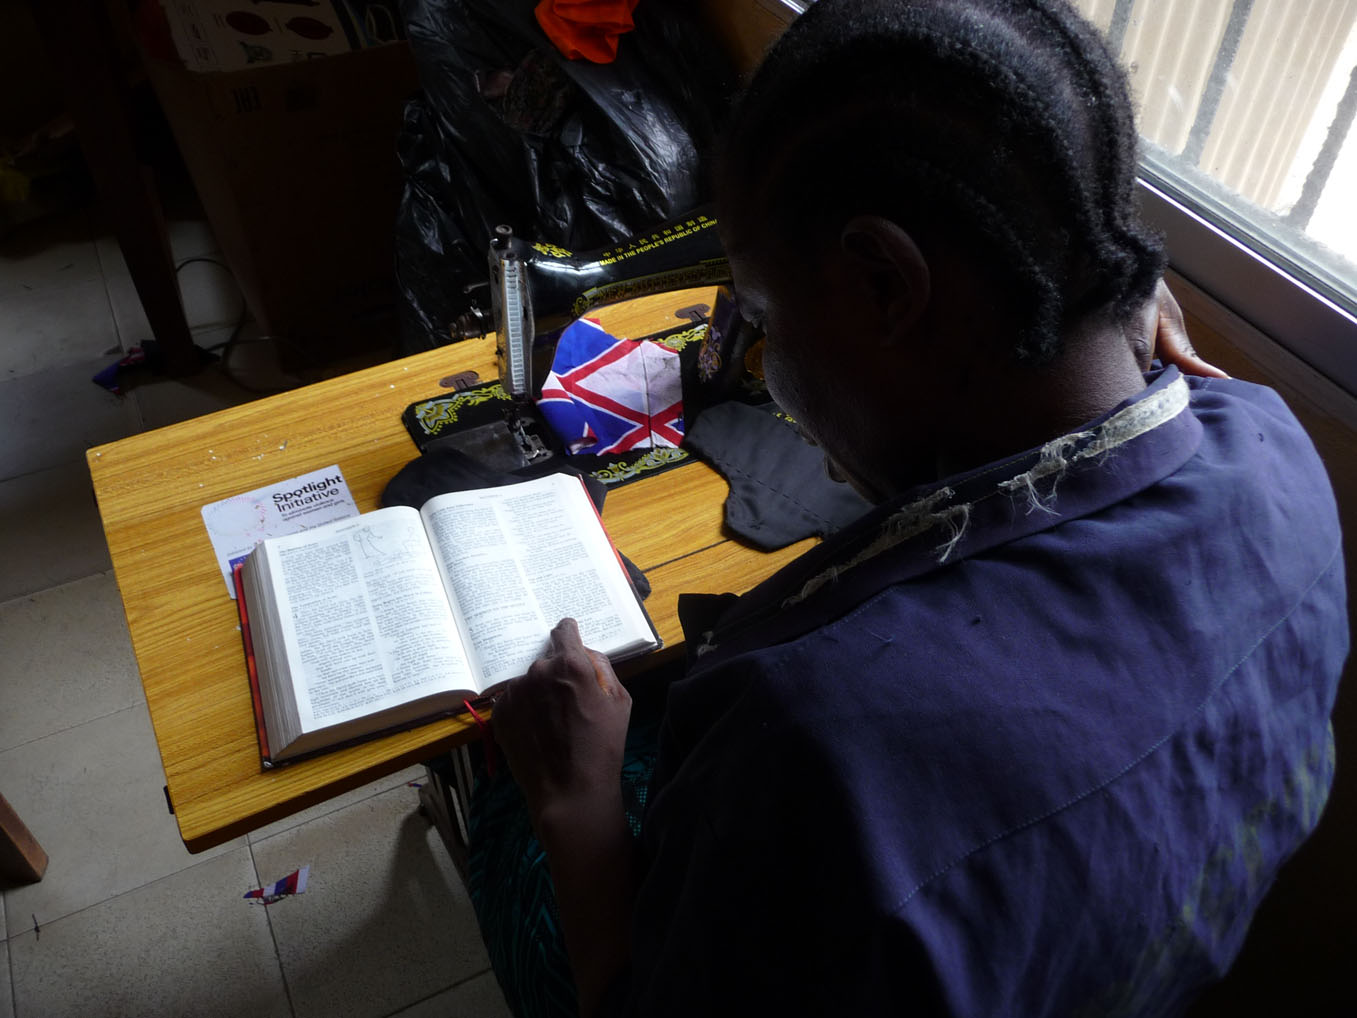 Garmai reads from the Gospels during a break in her sewing class.